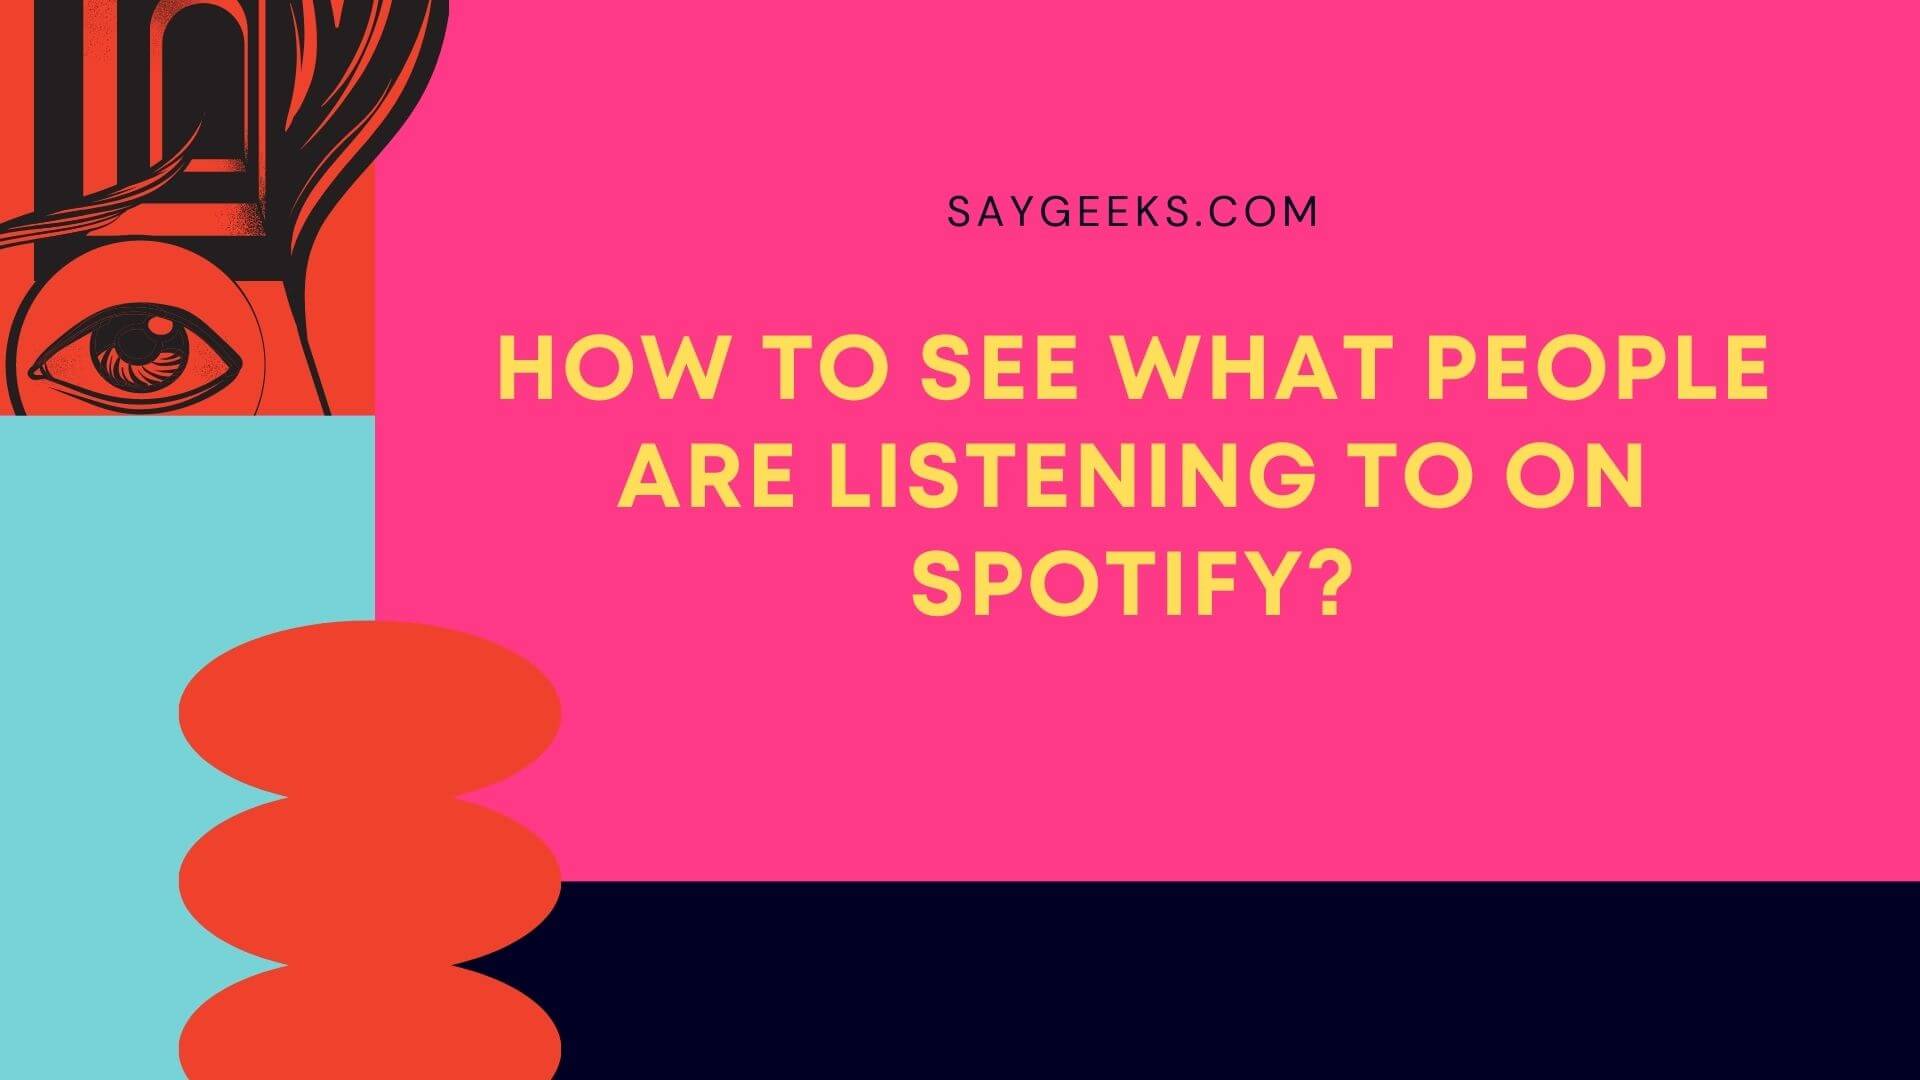 How to see what people are listening to on Spotify?